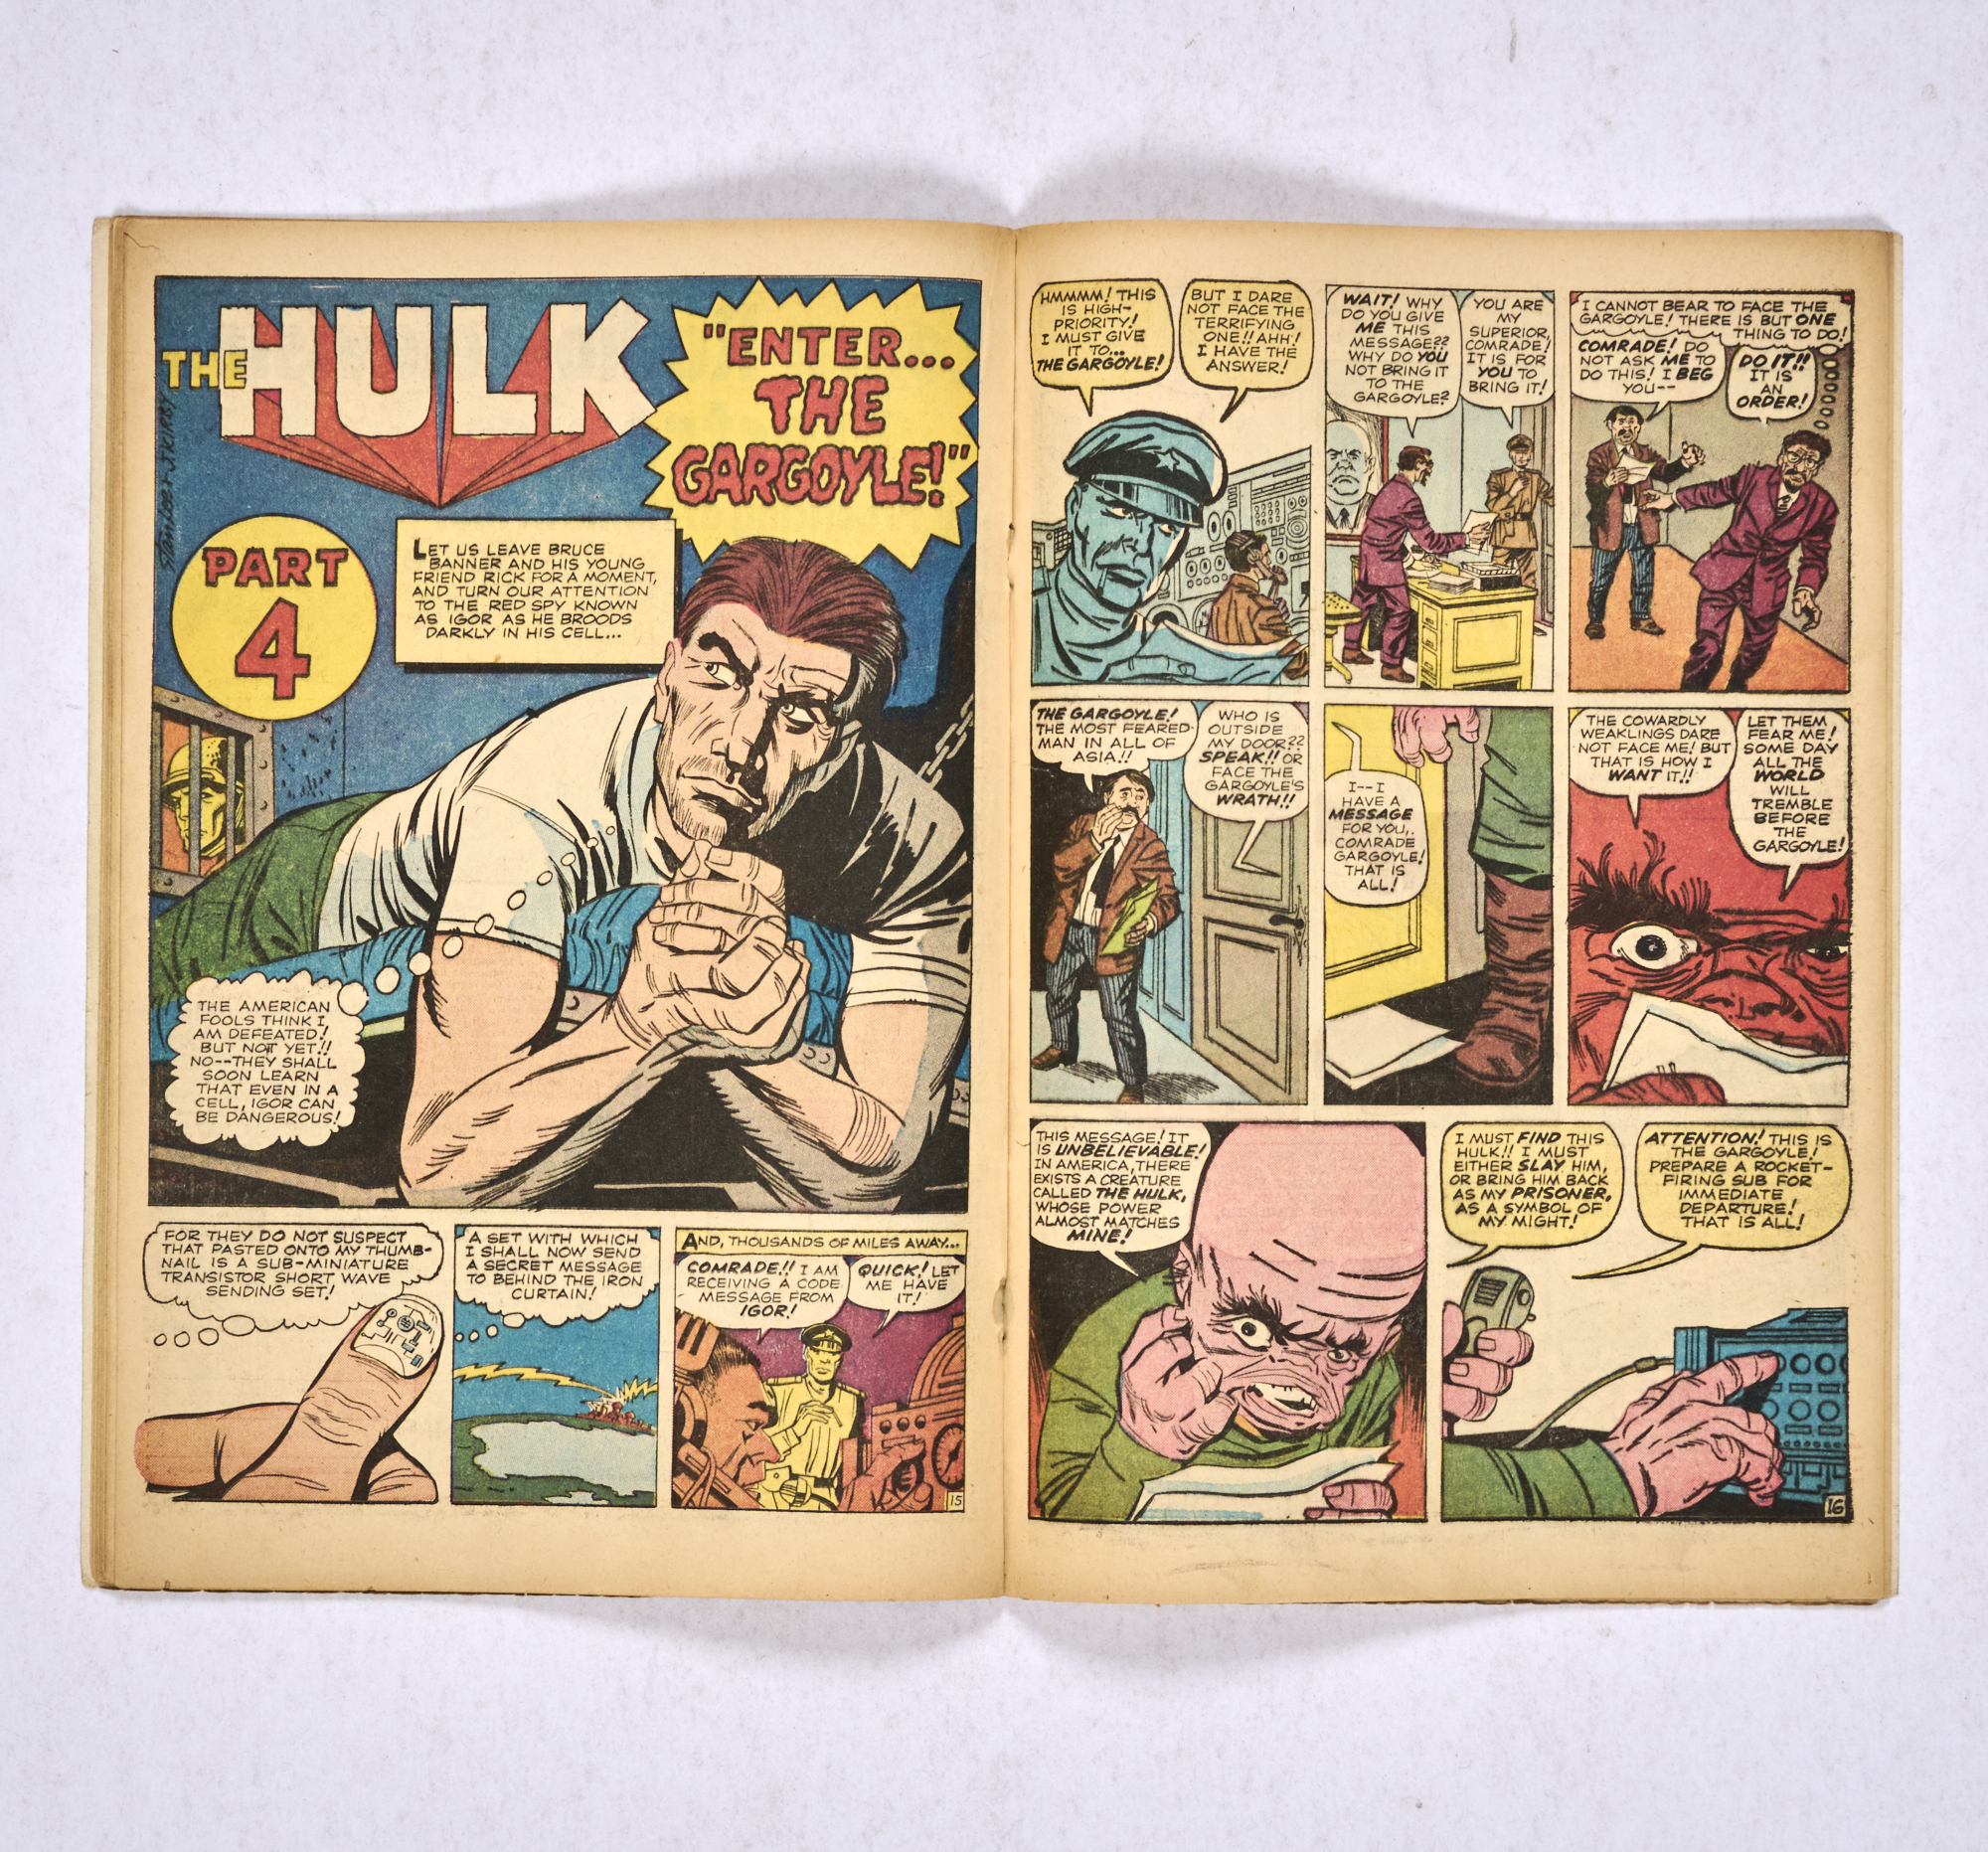 Incredible Hulk 1 (1962) General overall wear and lower staple rust with no major defects. Retrieved - Image 5 of 8